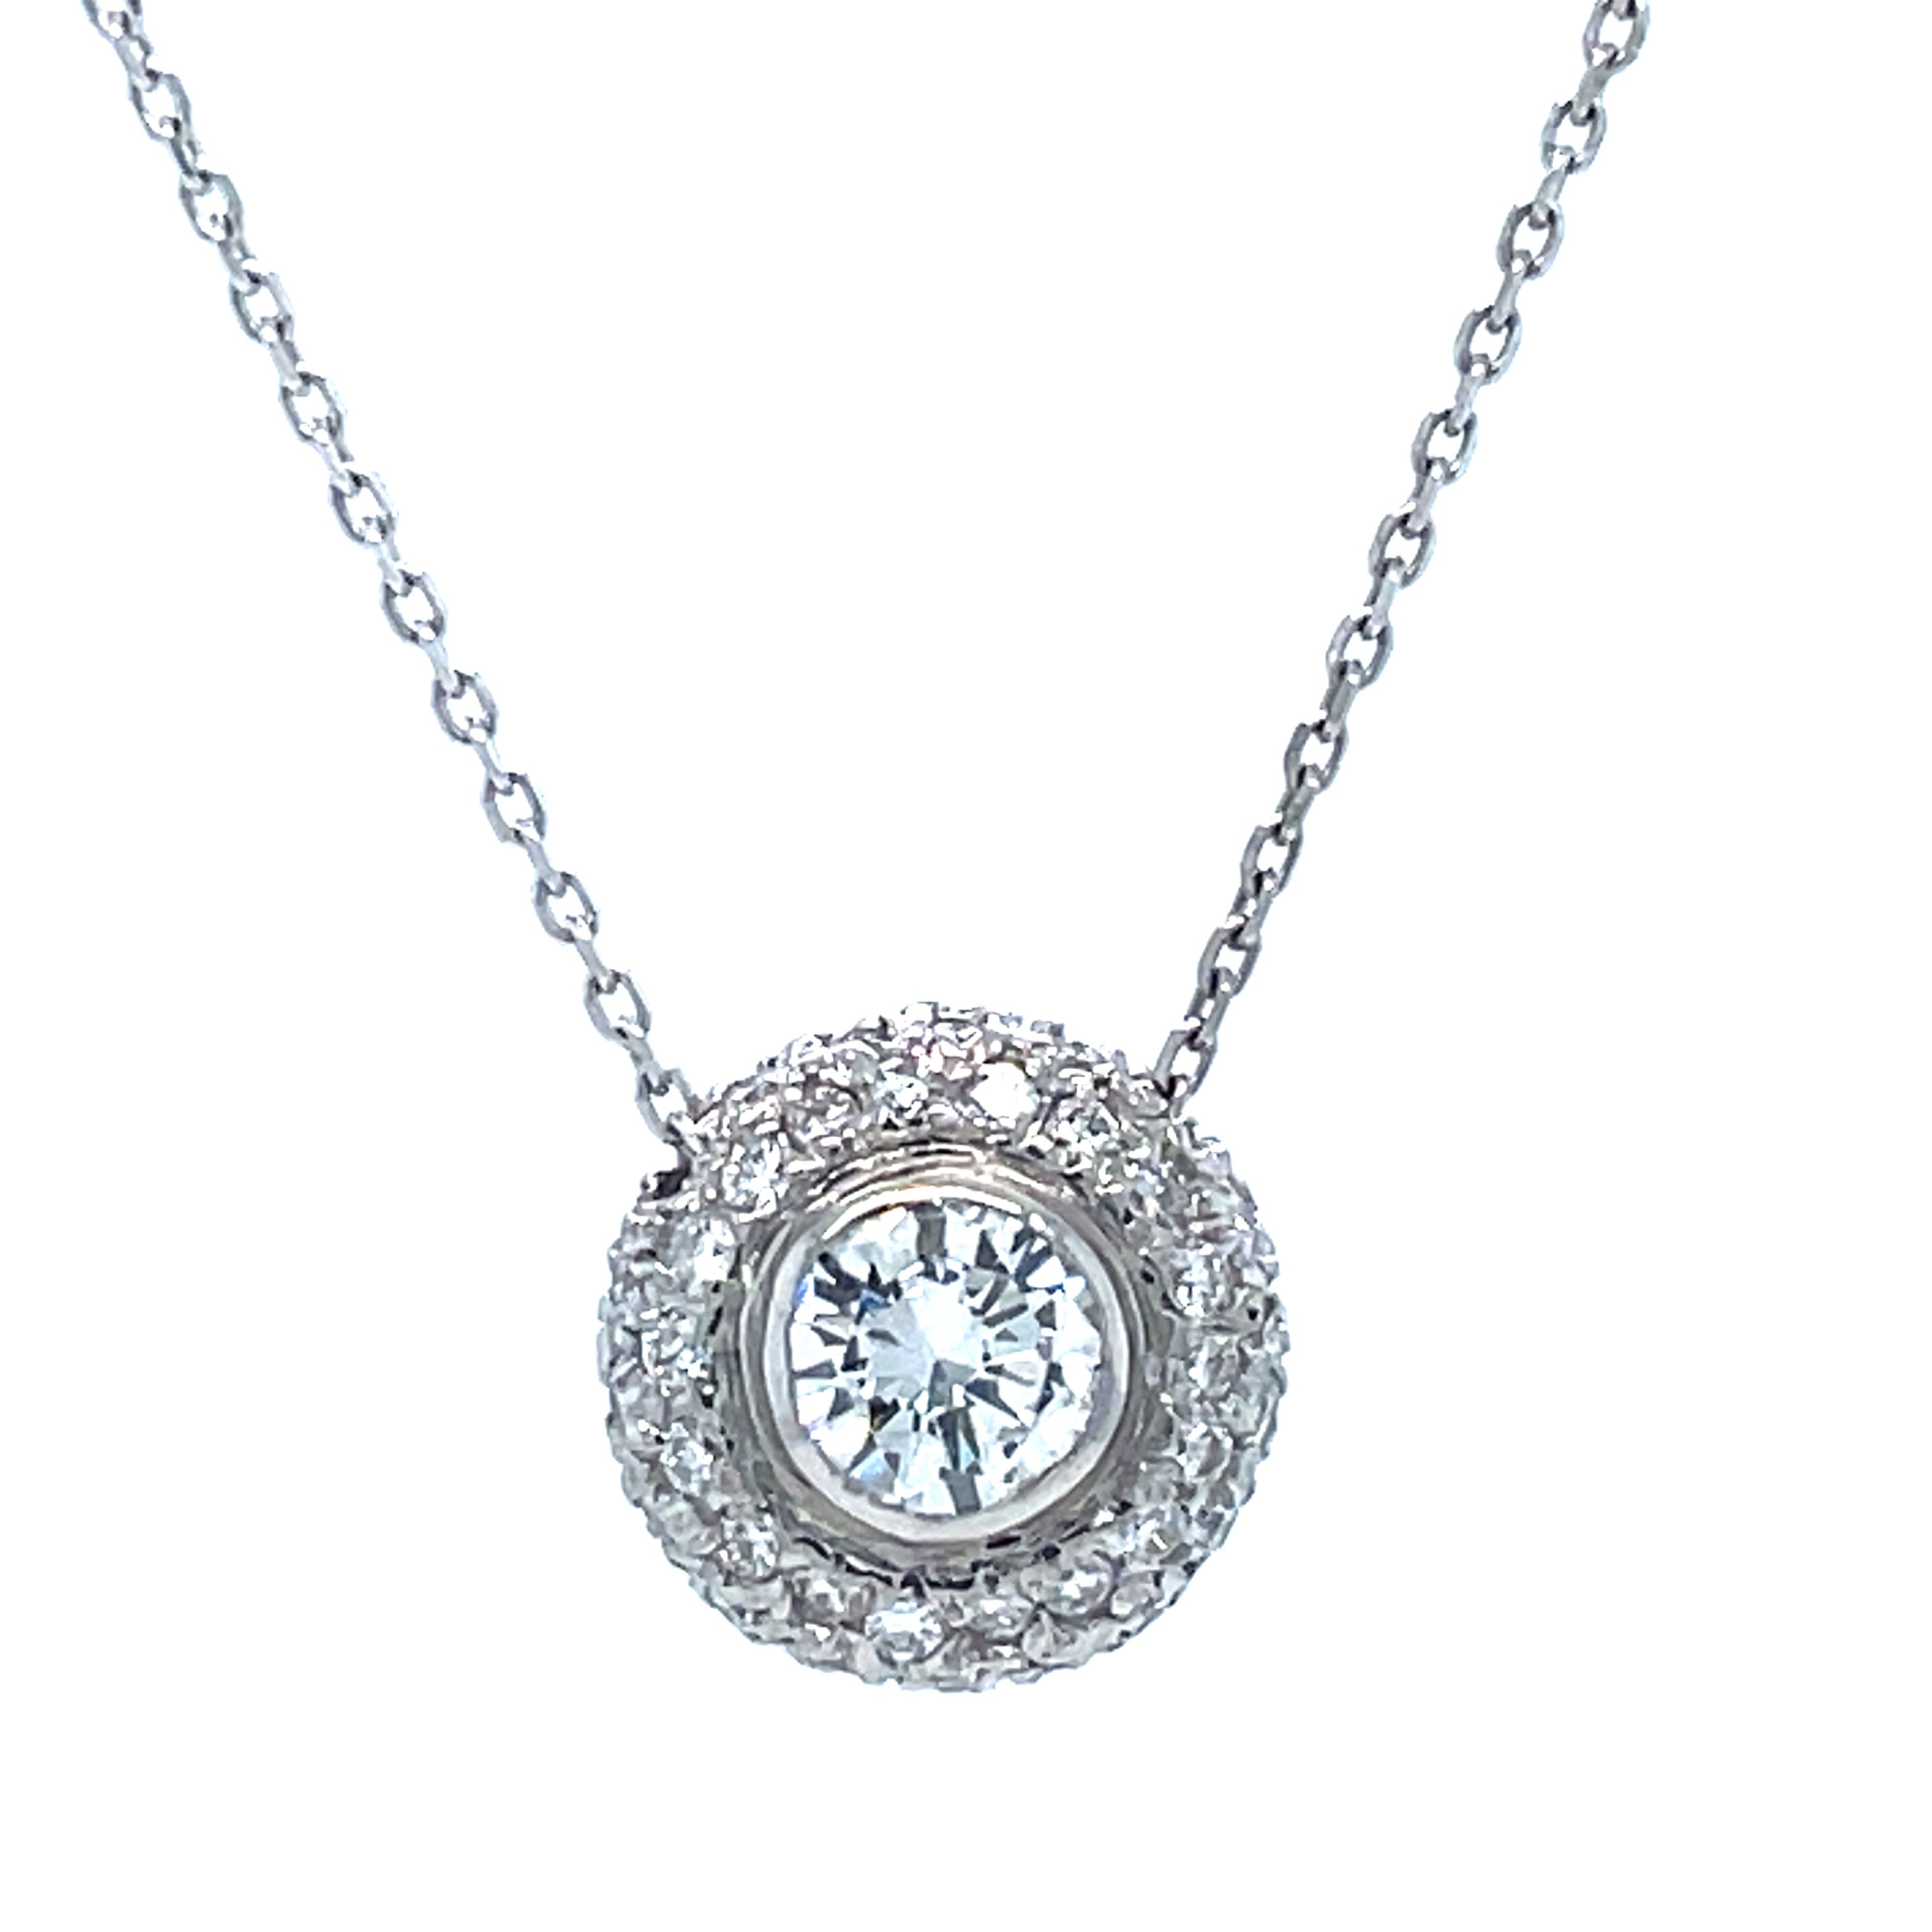 This luxurious diamond pendant necklace is crafted for brilliance and lasting beauty. It features a sparkling round 0.71 ct diamond solitaire at the center, surrounded by 0.50 cts of diamond pave setting. Set in 14k white gold, it also includes an 18" chain with a sizing loop at 16".